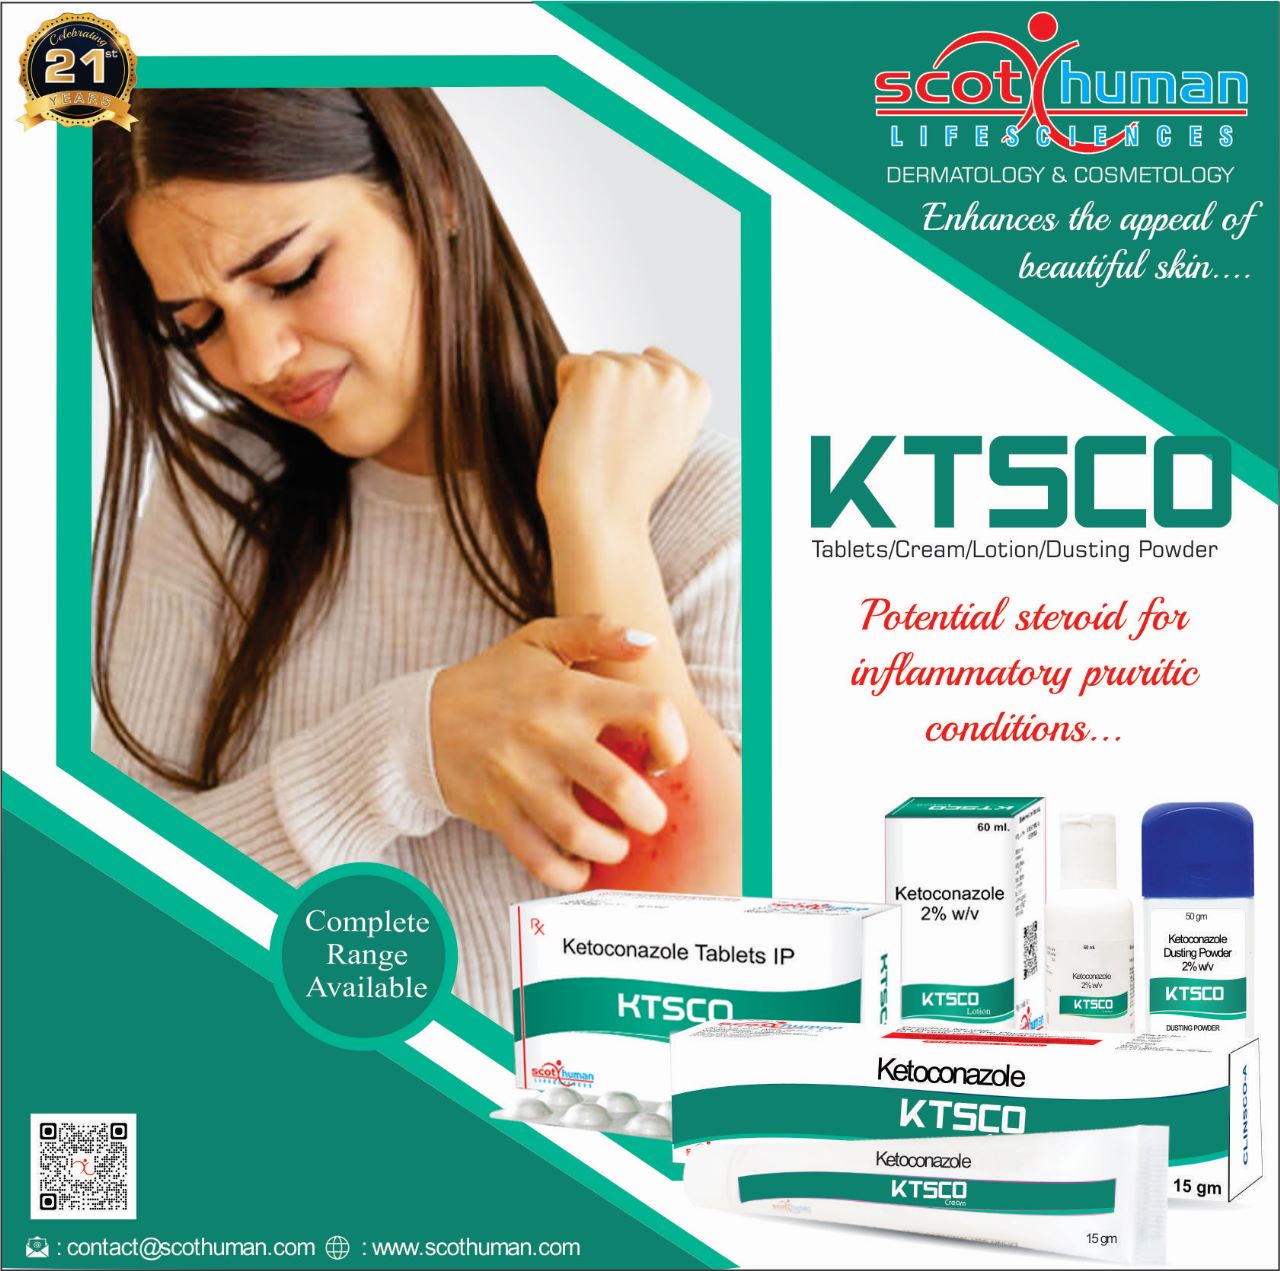 Product Name: Ktsco , Compositions of ketoconazole Tablets IP are ketoconazole Tablets IP - Pharma Drugs and Chemicals